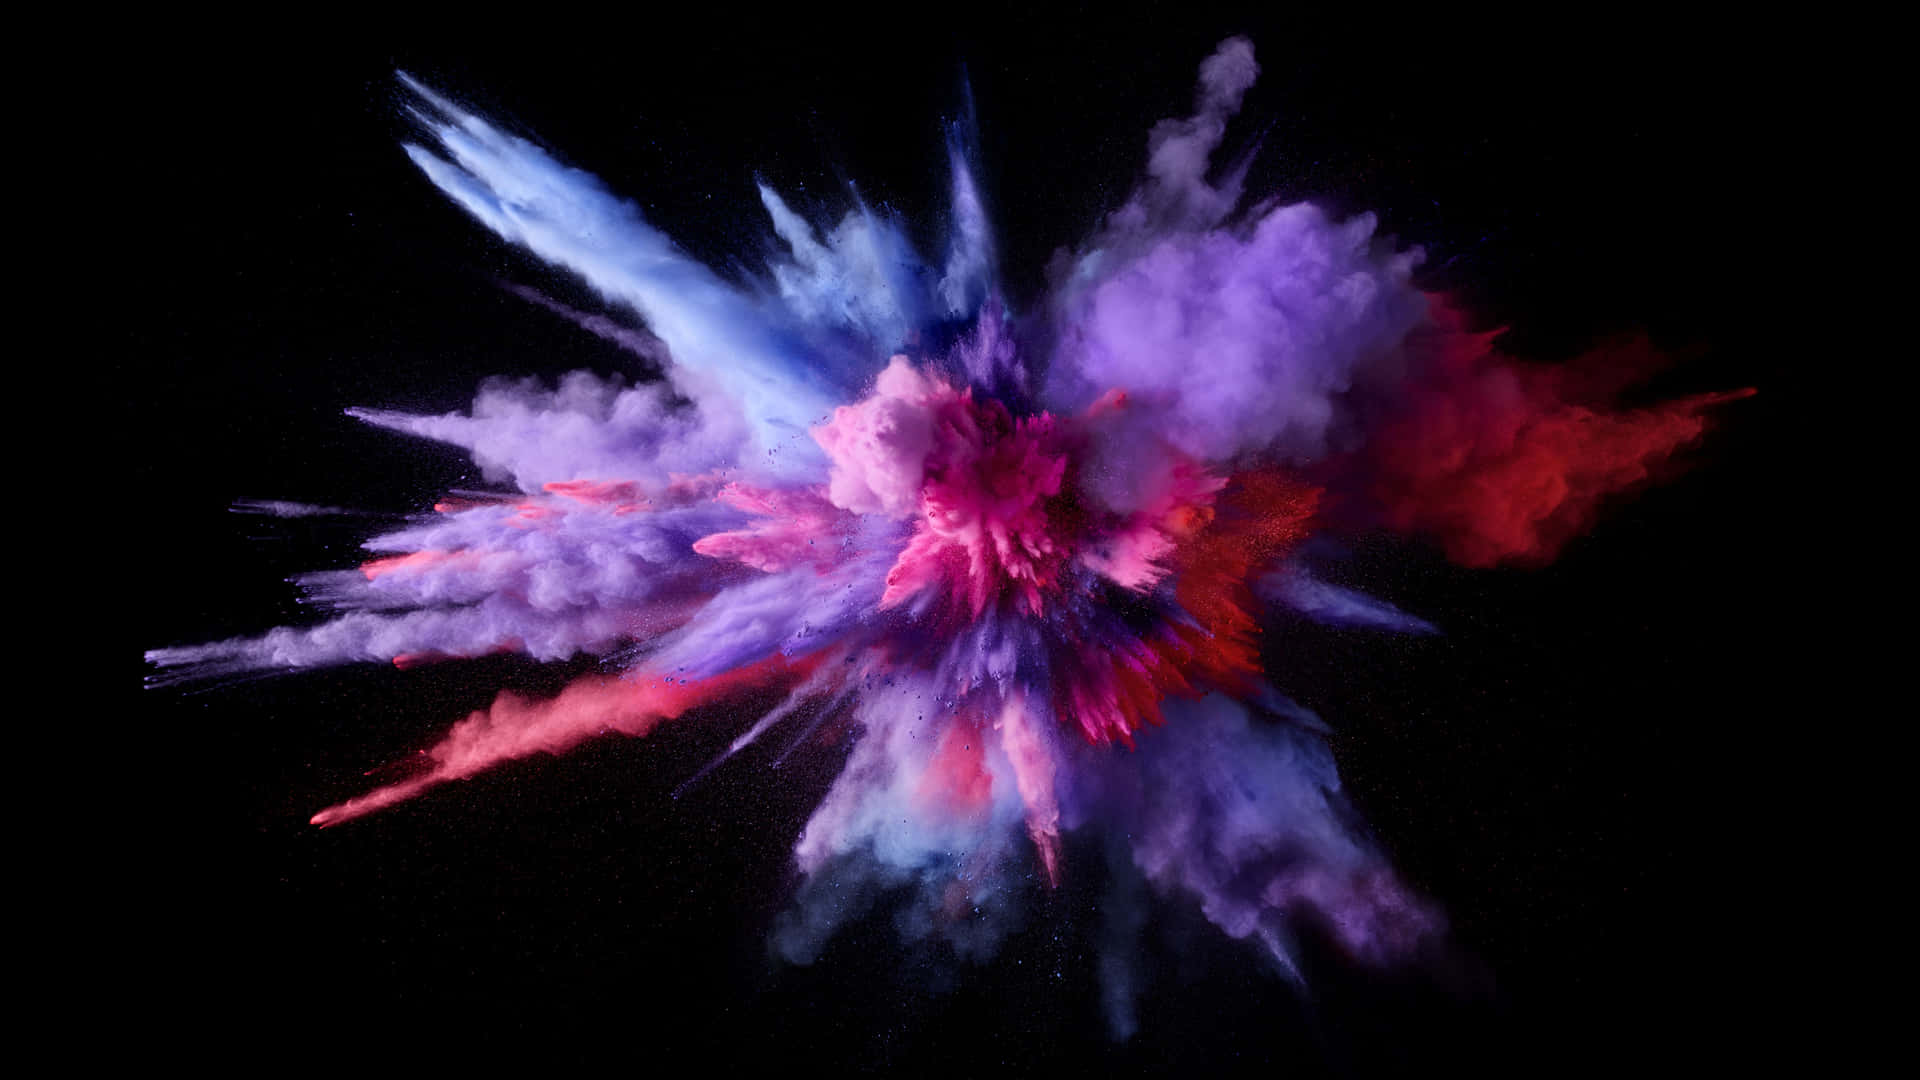 A Colorful Powder Explosion On A Black Background